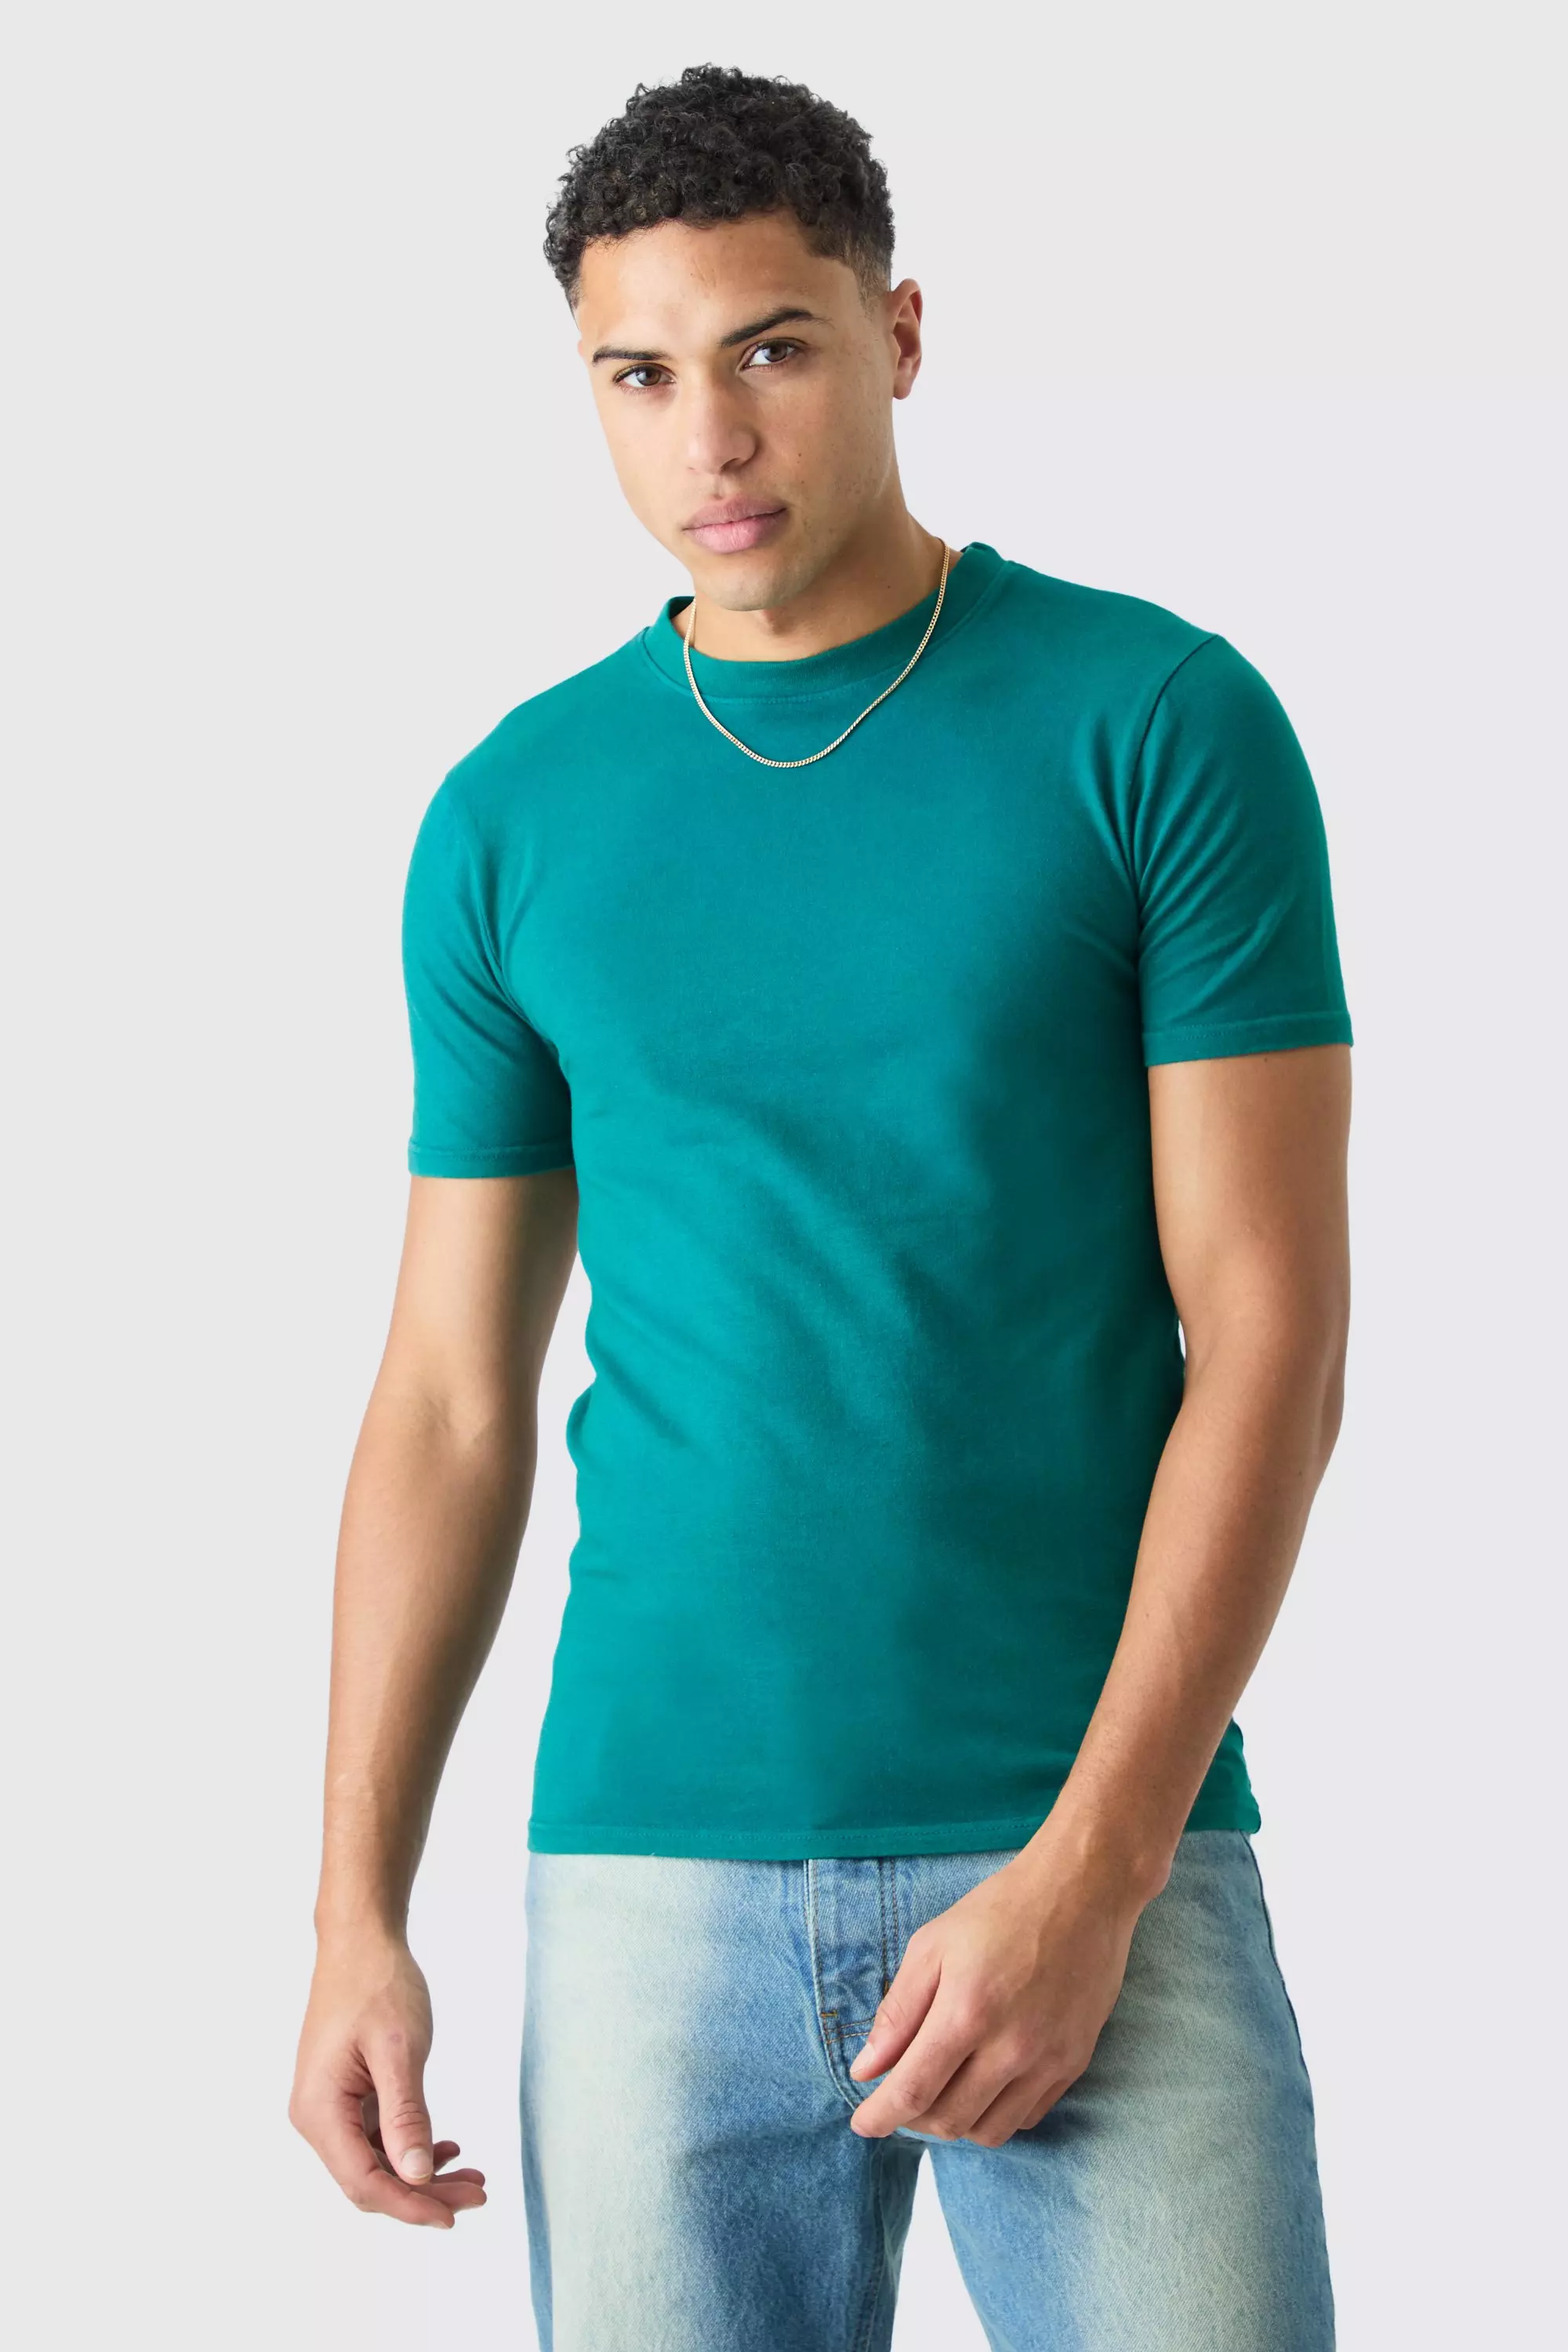 Teal Green Muscle Fit Acid Wash Crew Neck T-shirt